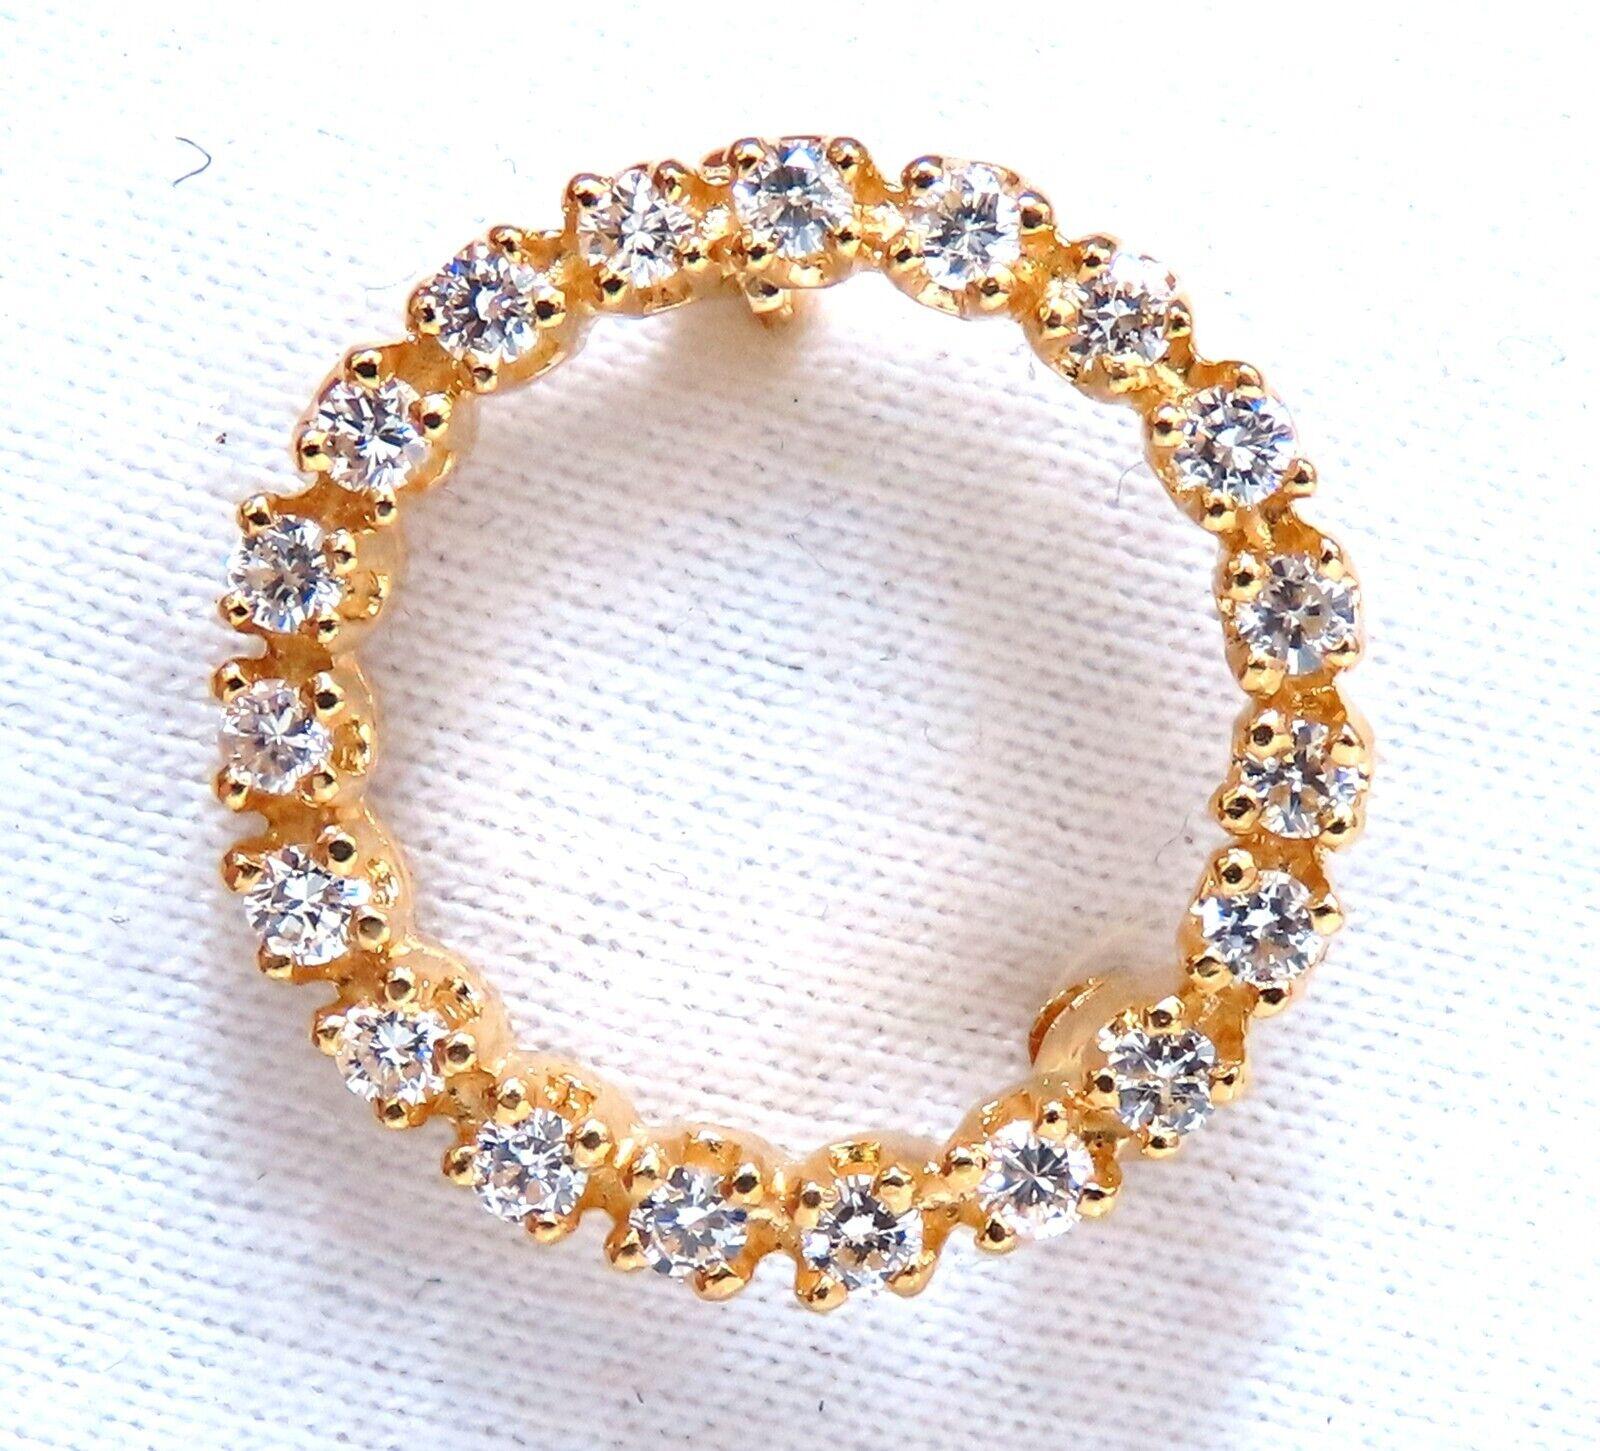 Circle Pin

Very Well Made

.80ct natural diamond

Round Full cut

H-color Vs-2 Clarity

21 mm diameter

14kt. yellow gold 

3 Grams.